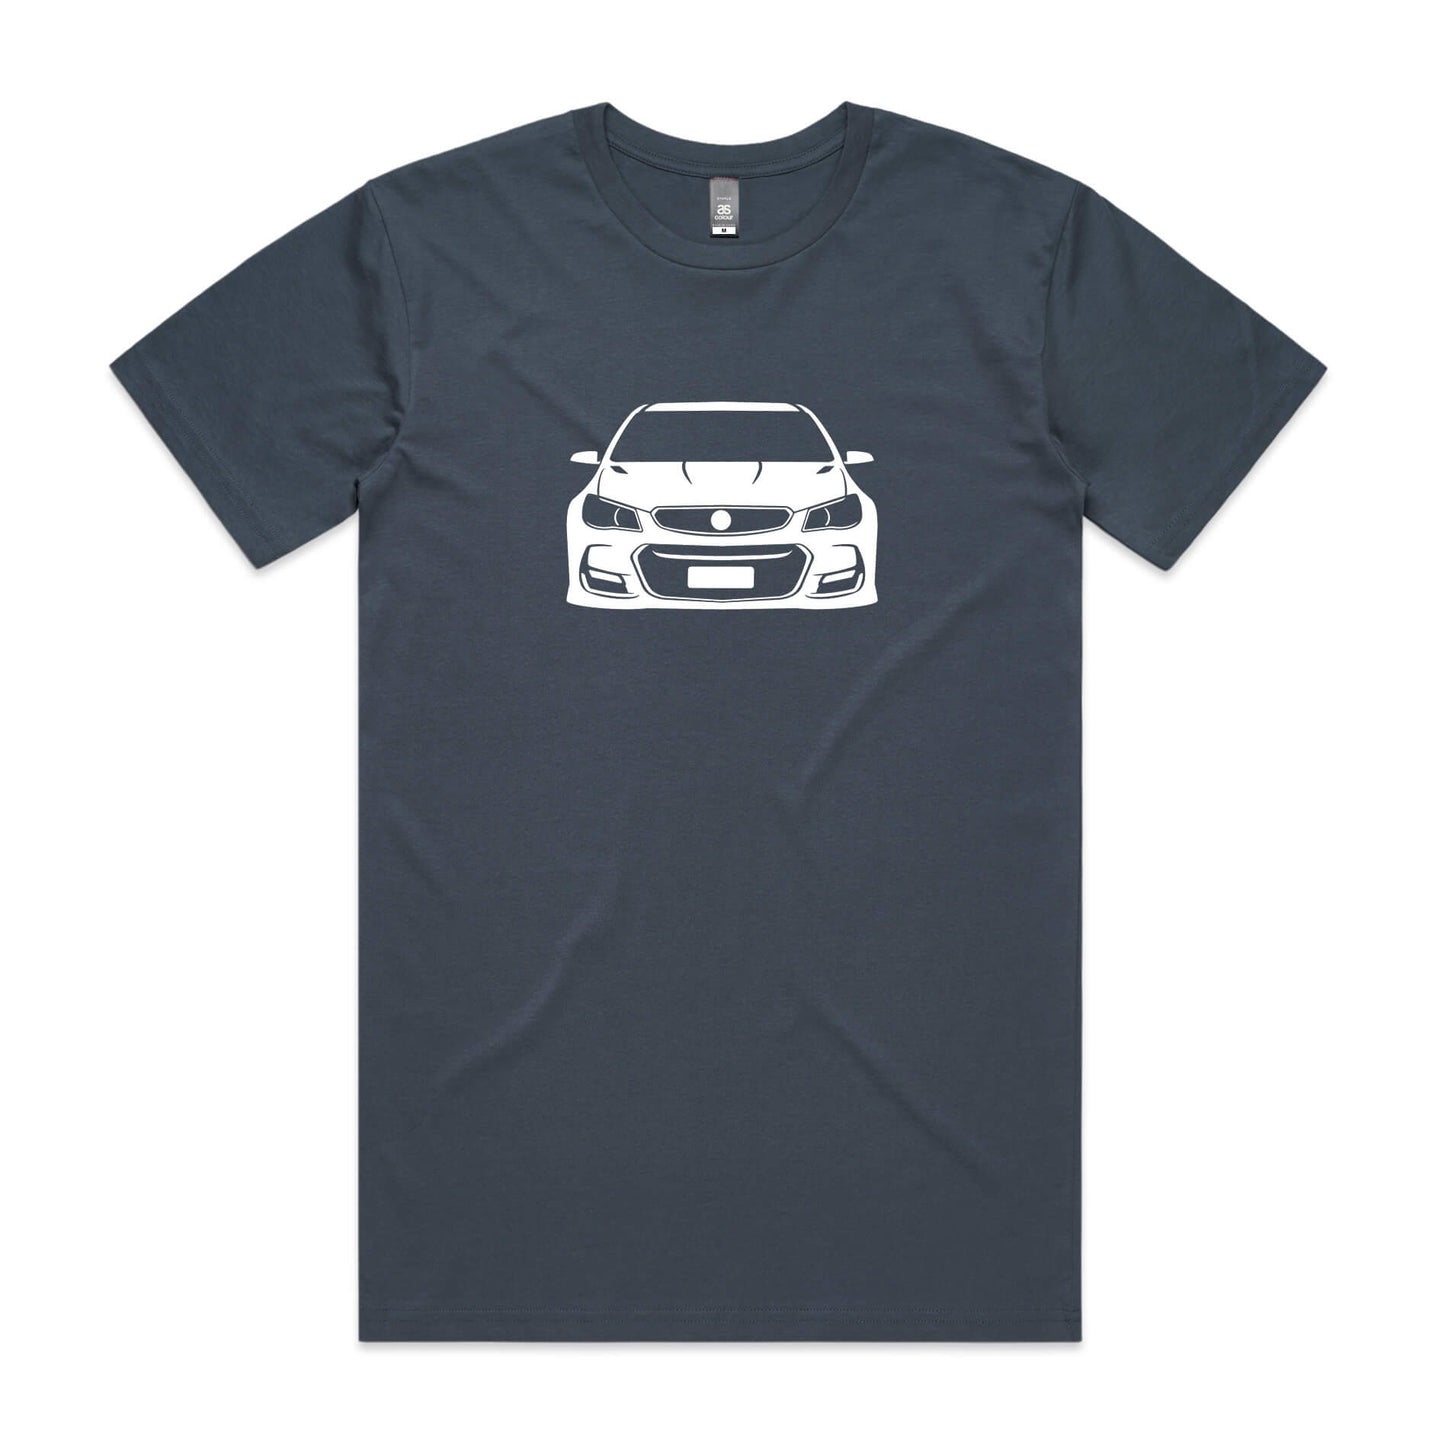 Holden VF Commodore t-shirt in Petrol